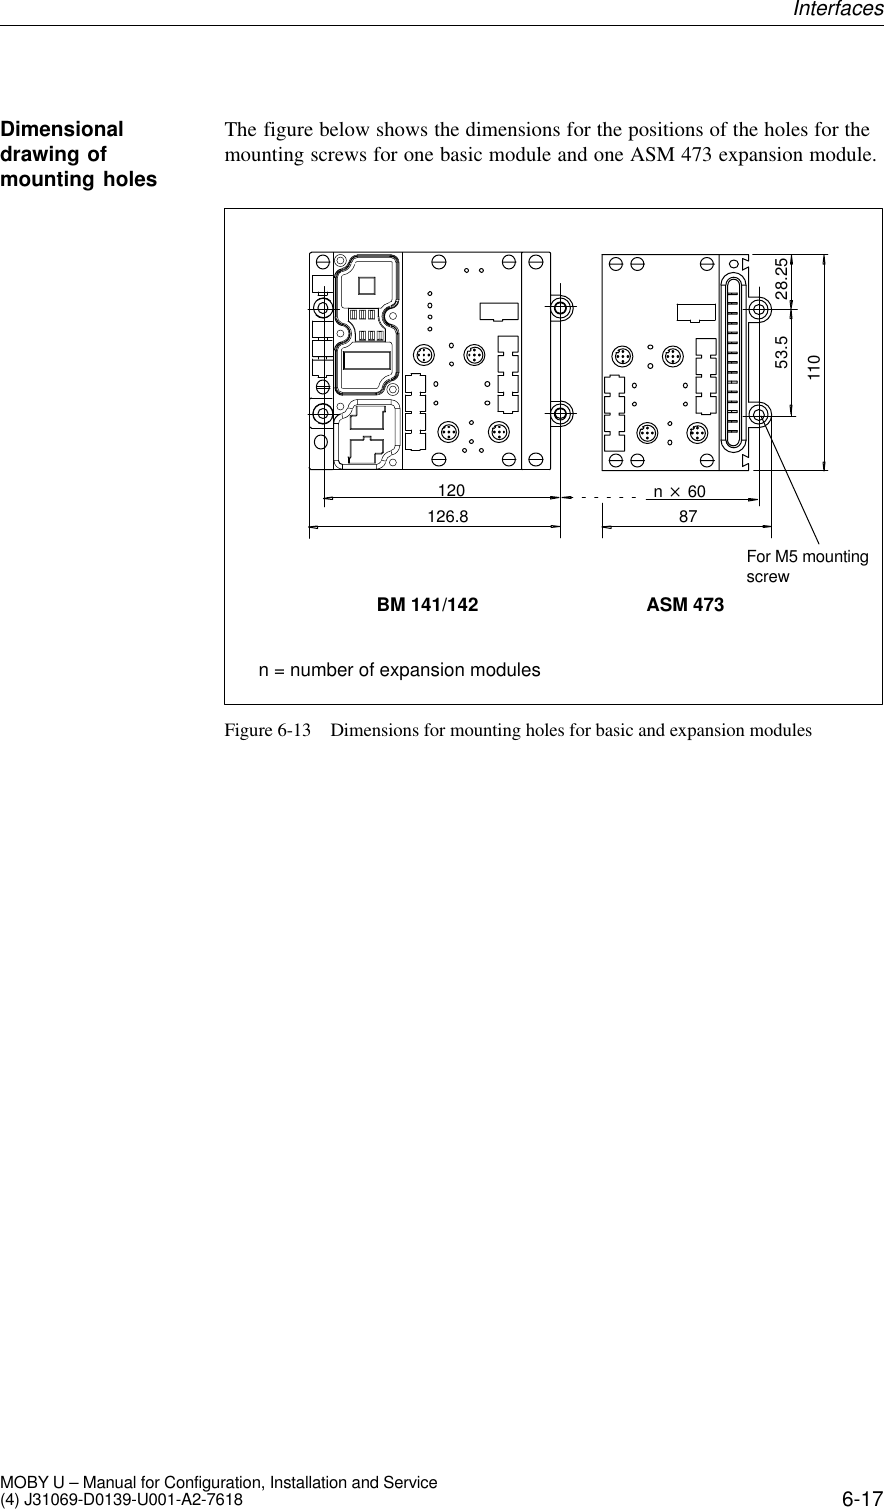 6-17MOBY U – Manual for Configuration, Installation and Service(4) J31069-D0139-U001-A2-7618The figure below shows the dimensions for the positions of the holes for themounting screws for one basic module and one ASM 473 expansion module.n   6012053.5n = number of expansion modules28.25126.8BM 141/142 ASM 47387110For M5 mountingscrewFigure 6-13 Dimensions for mounting holes for basic and expansion modulesDimensionaldrawing ofmounting holesInterfaces